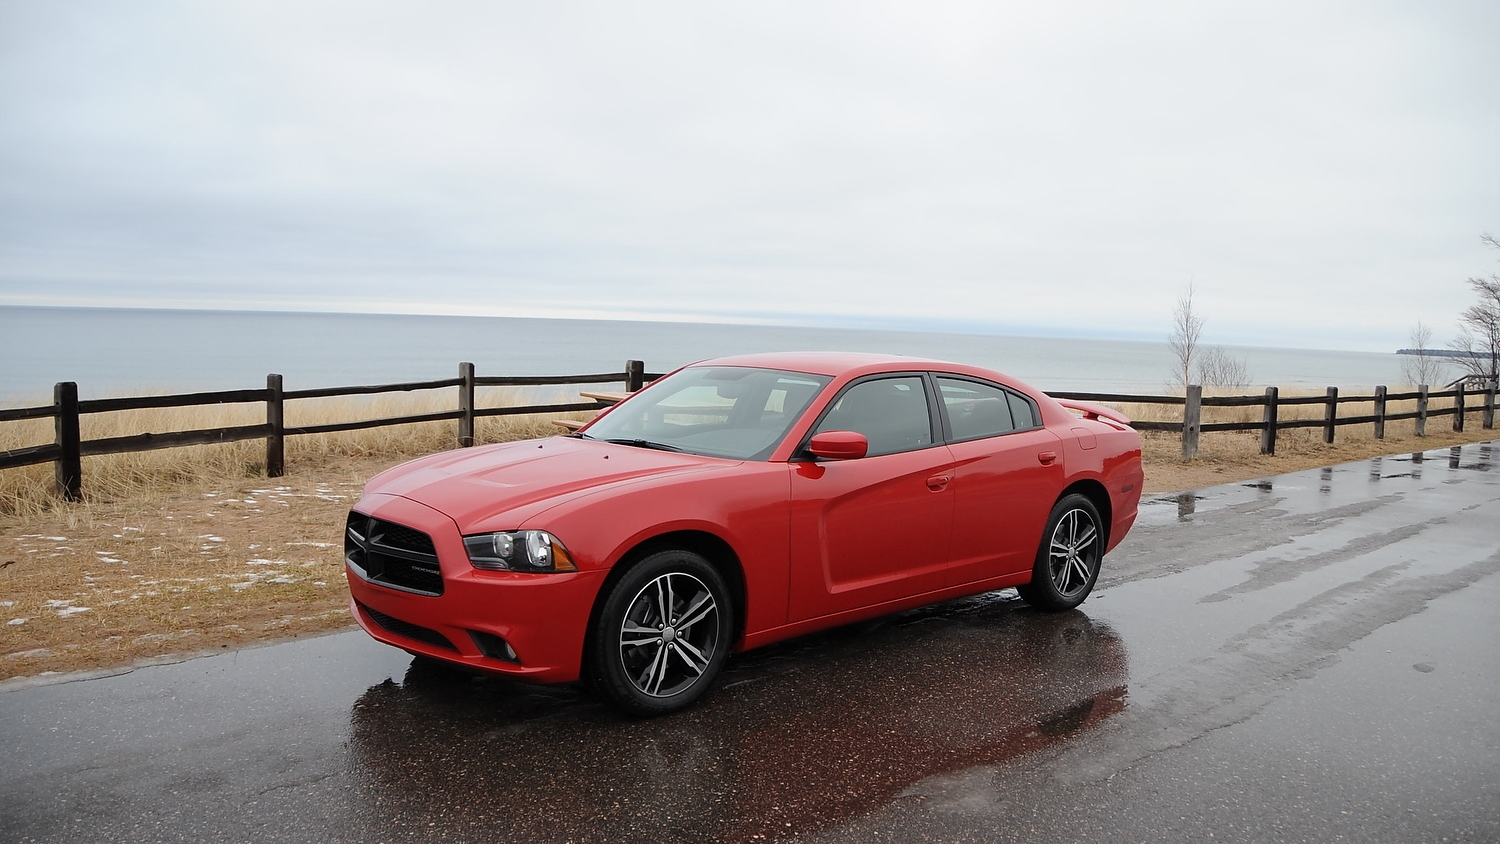 2013 Dodge Charger AWD Sport - winter road trip